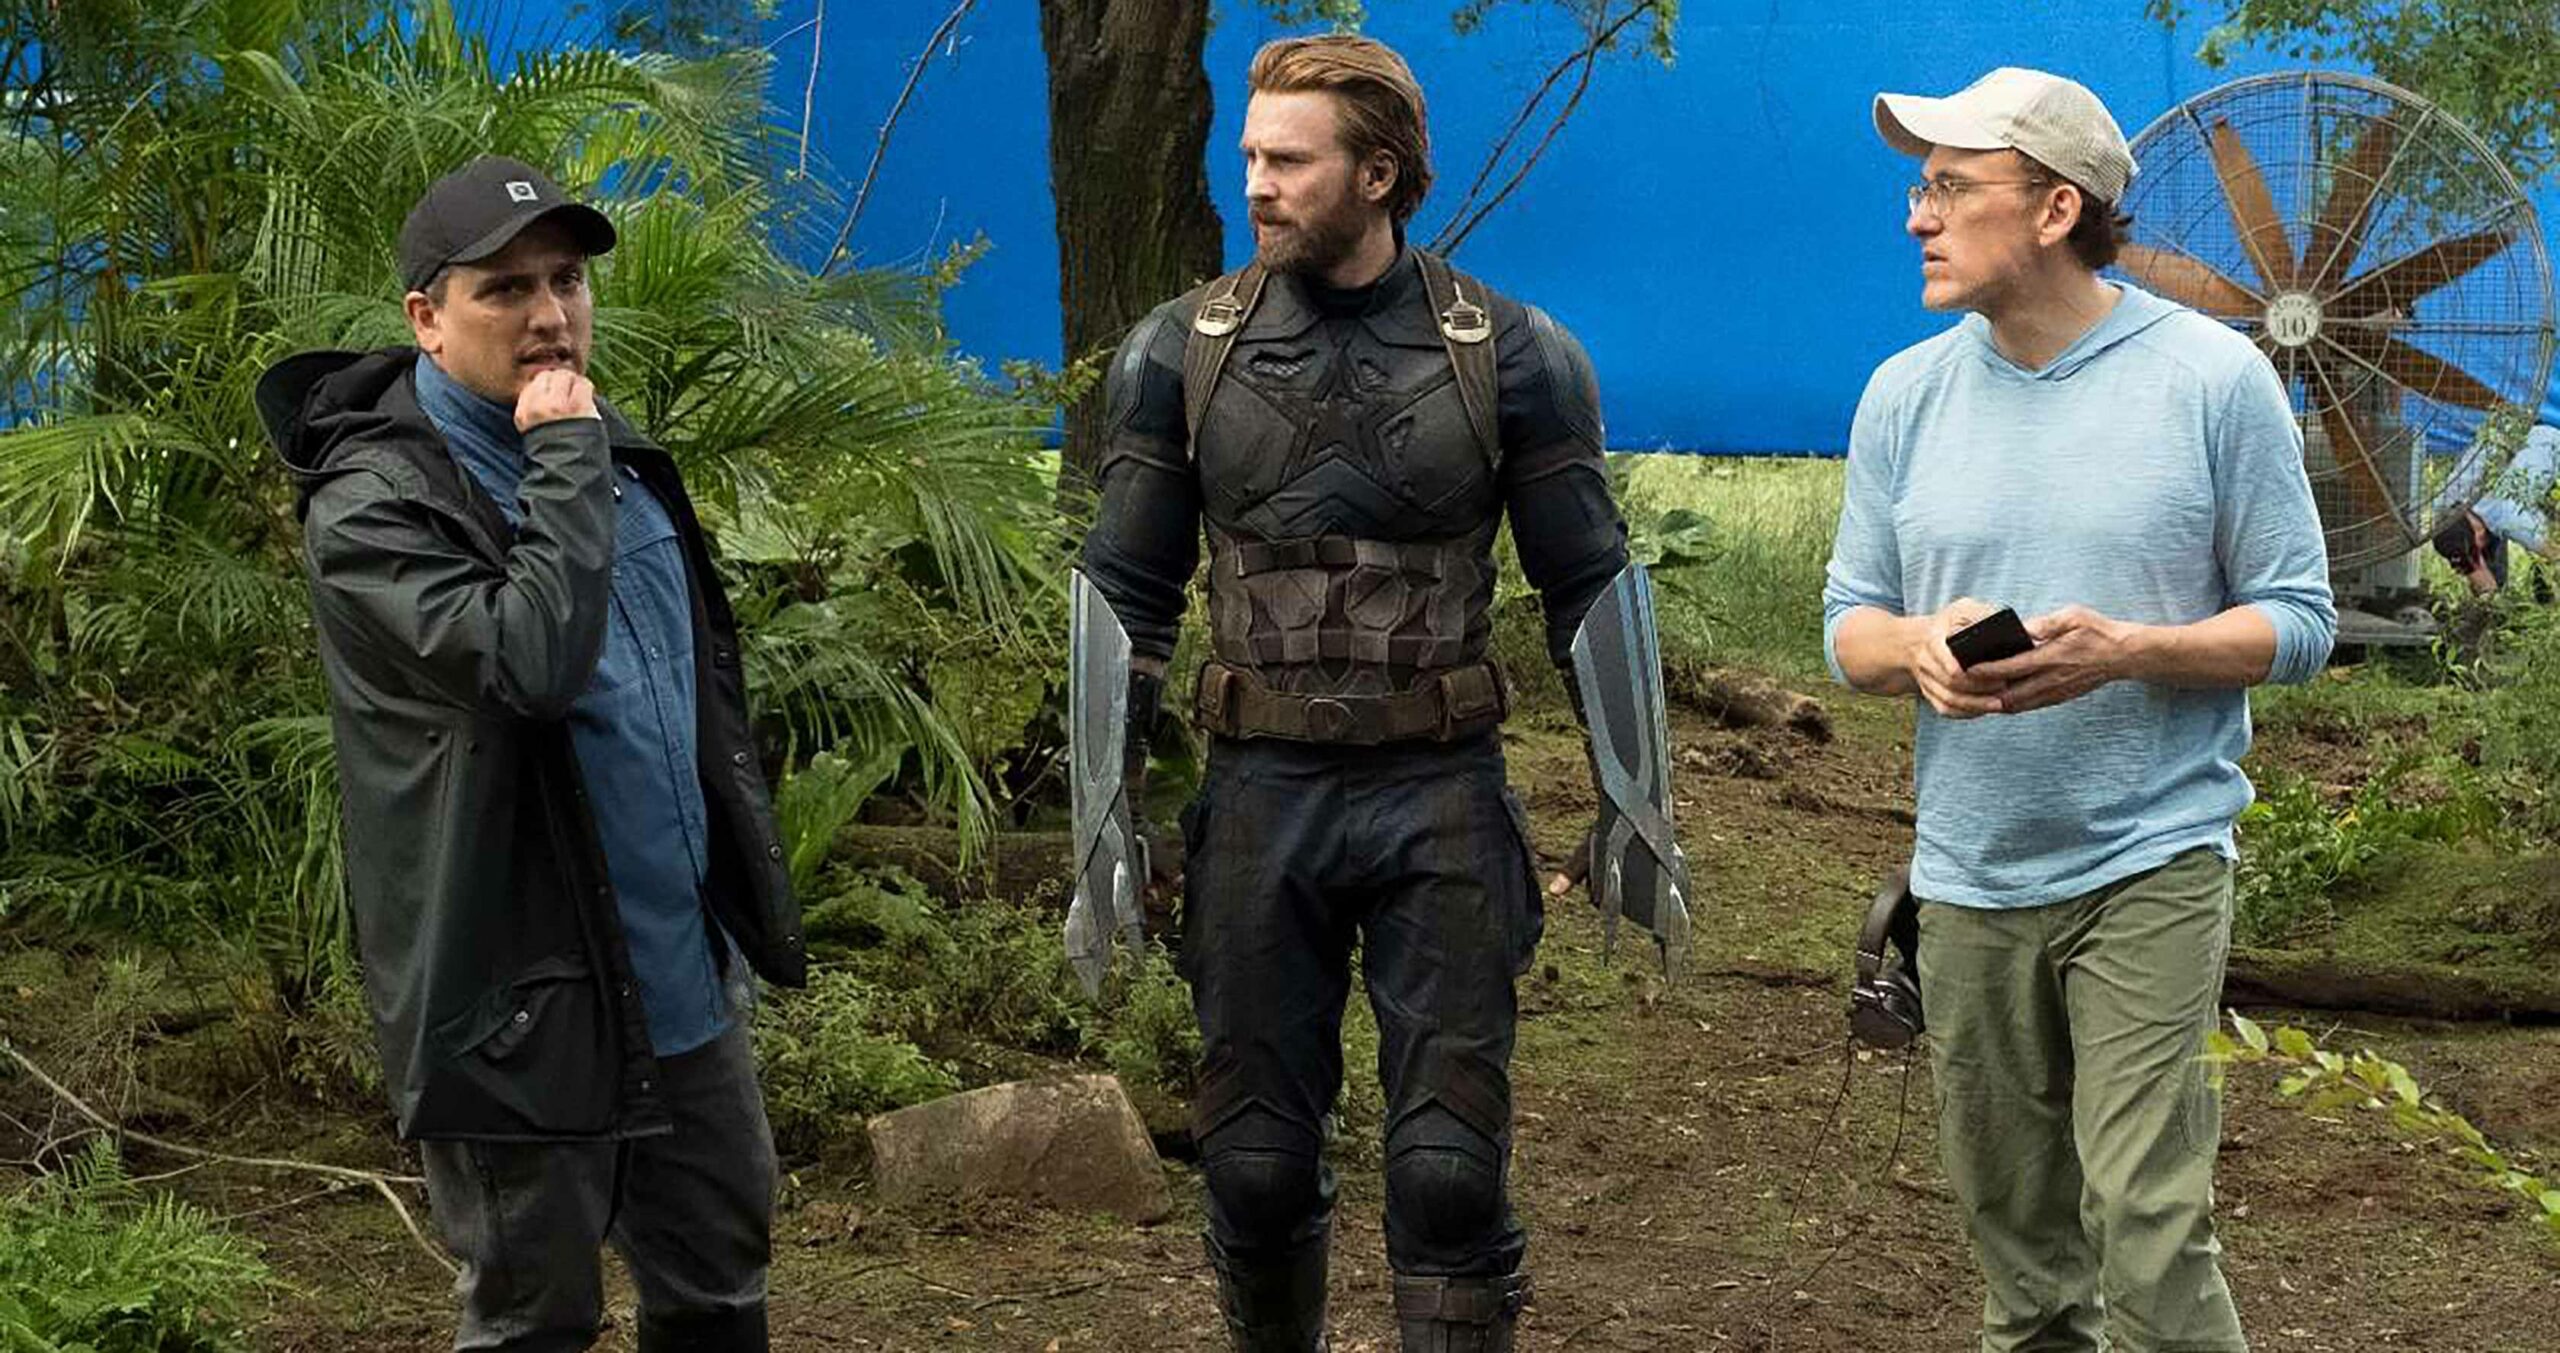 Chris Evans with the Russo Brothers